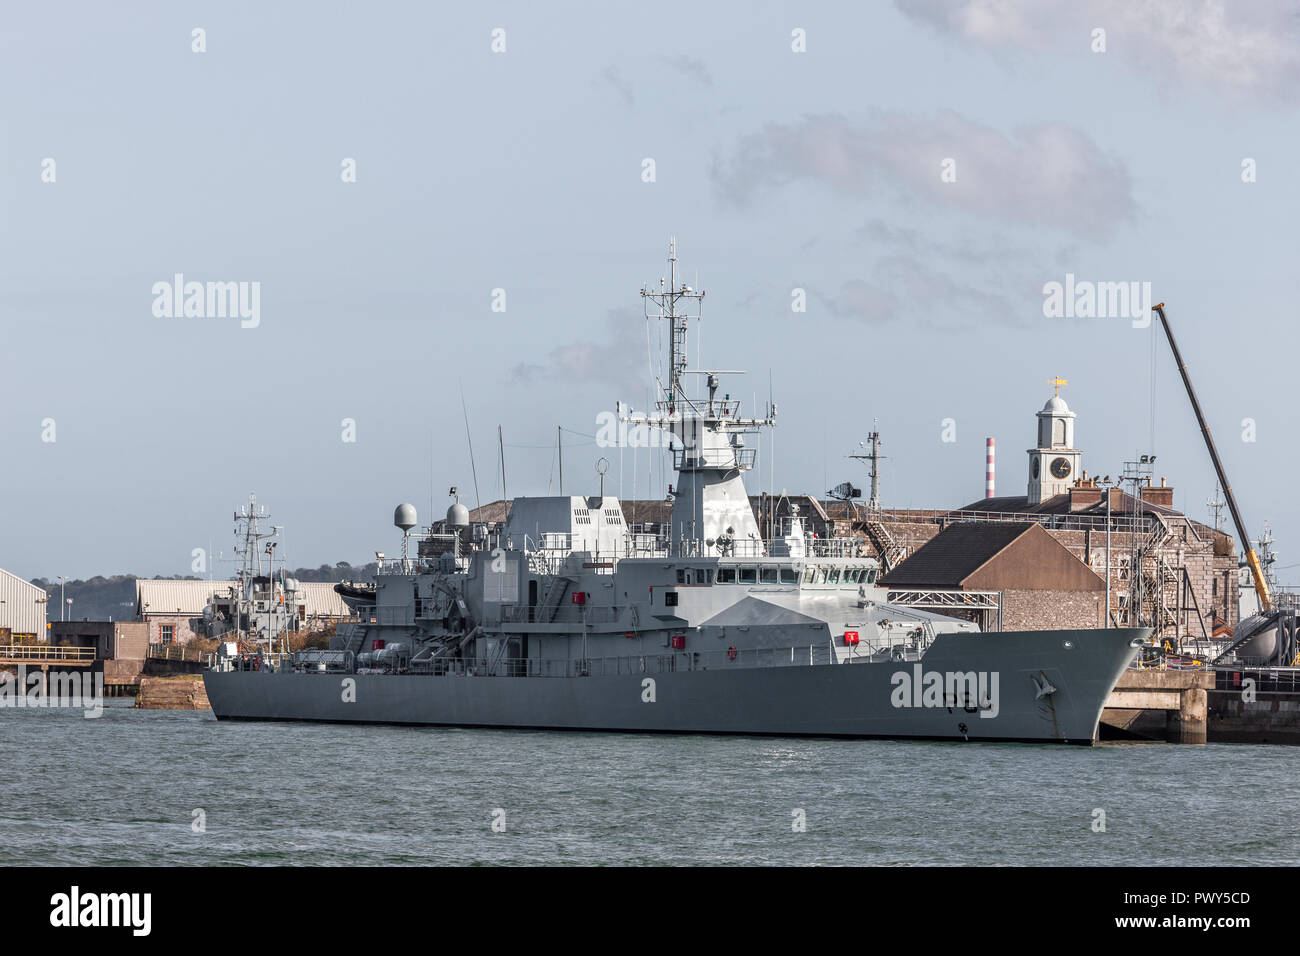 Haulbowline, Cork, Ireland, 18th October, 2018. Newly built Irish Naval vessel LE George Bernard Shaw  after arriving from the shipyard in Devon where she was commissioned. She will now undergo equipment fit-out where her communications equipment and primary armament will be installed at Haulbowline, Cork, Ireland. Credit: David Creedon/Alamy Live News Stock Photo